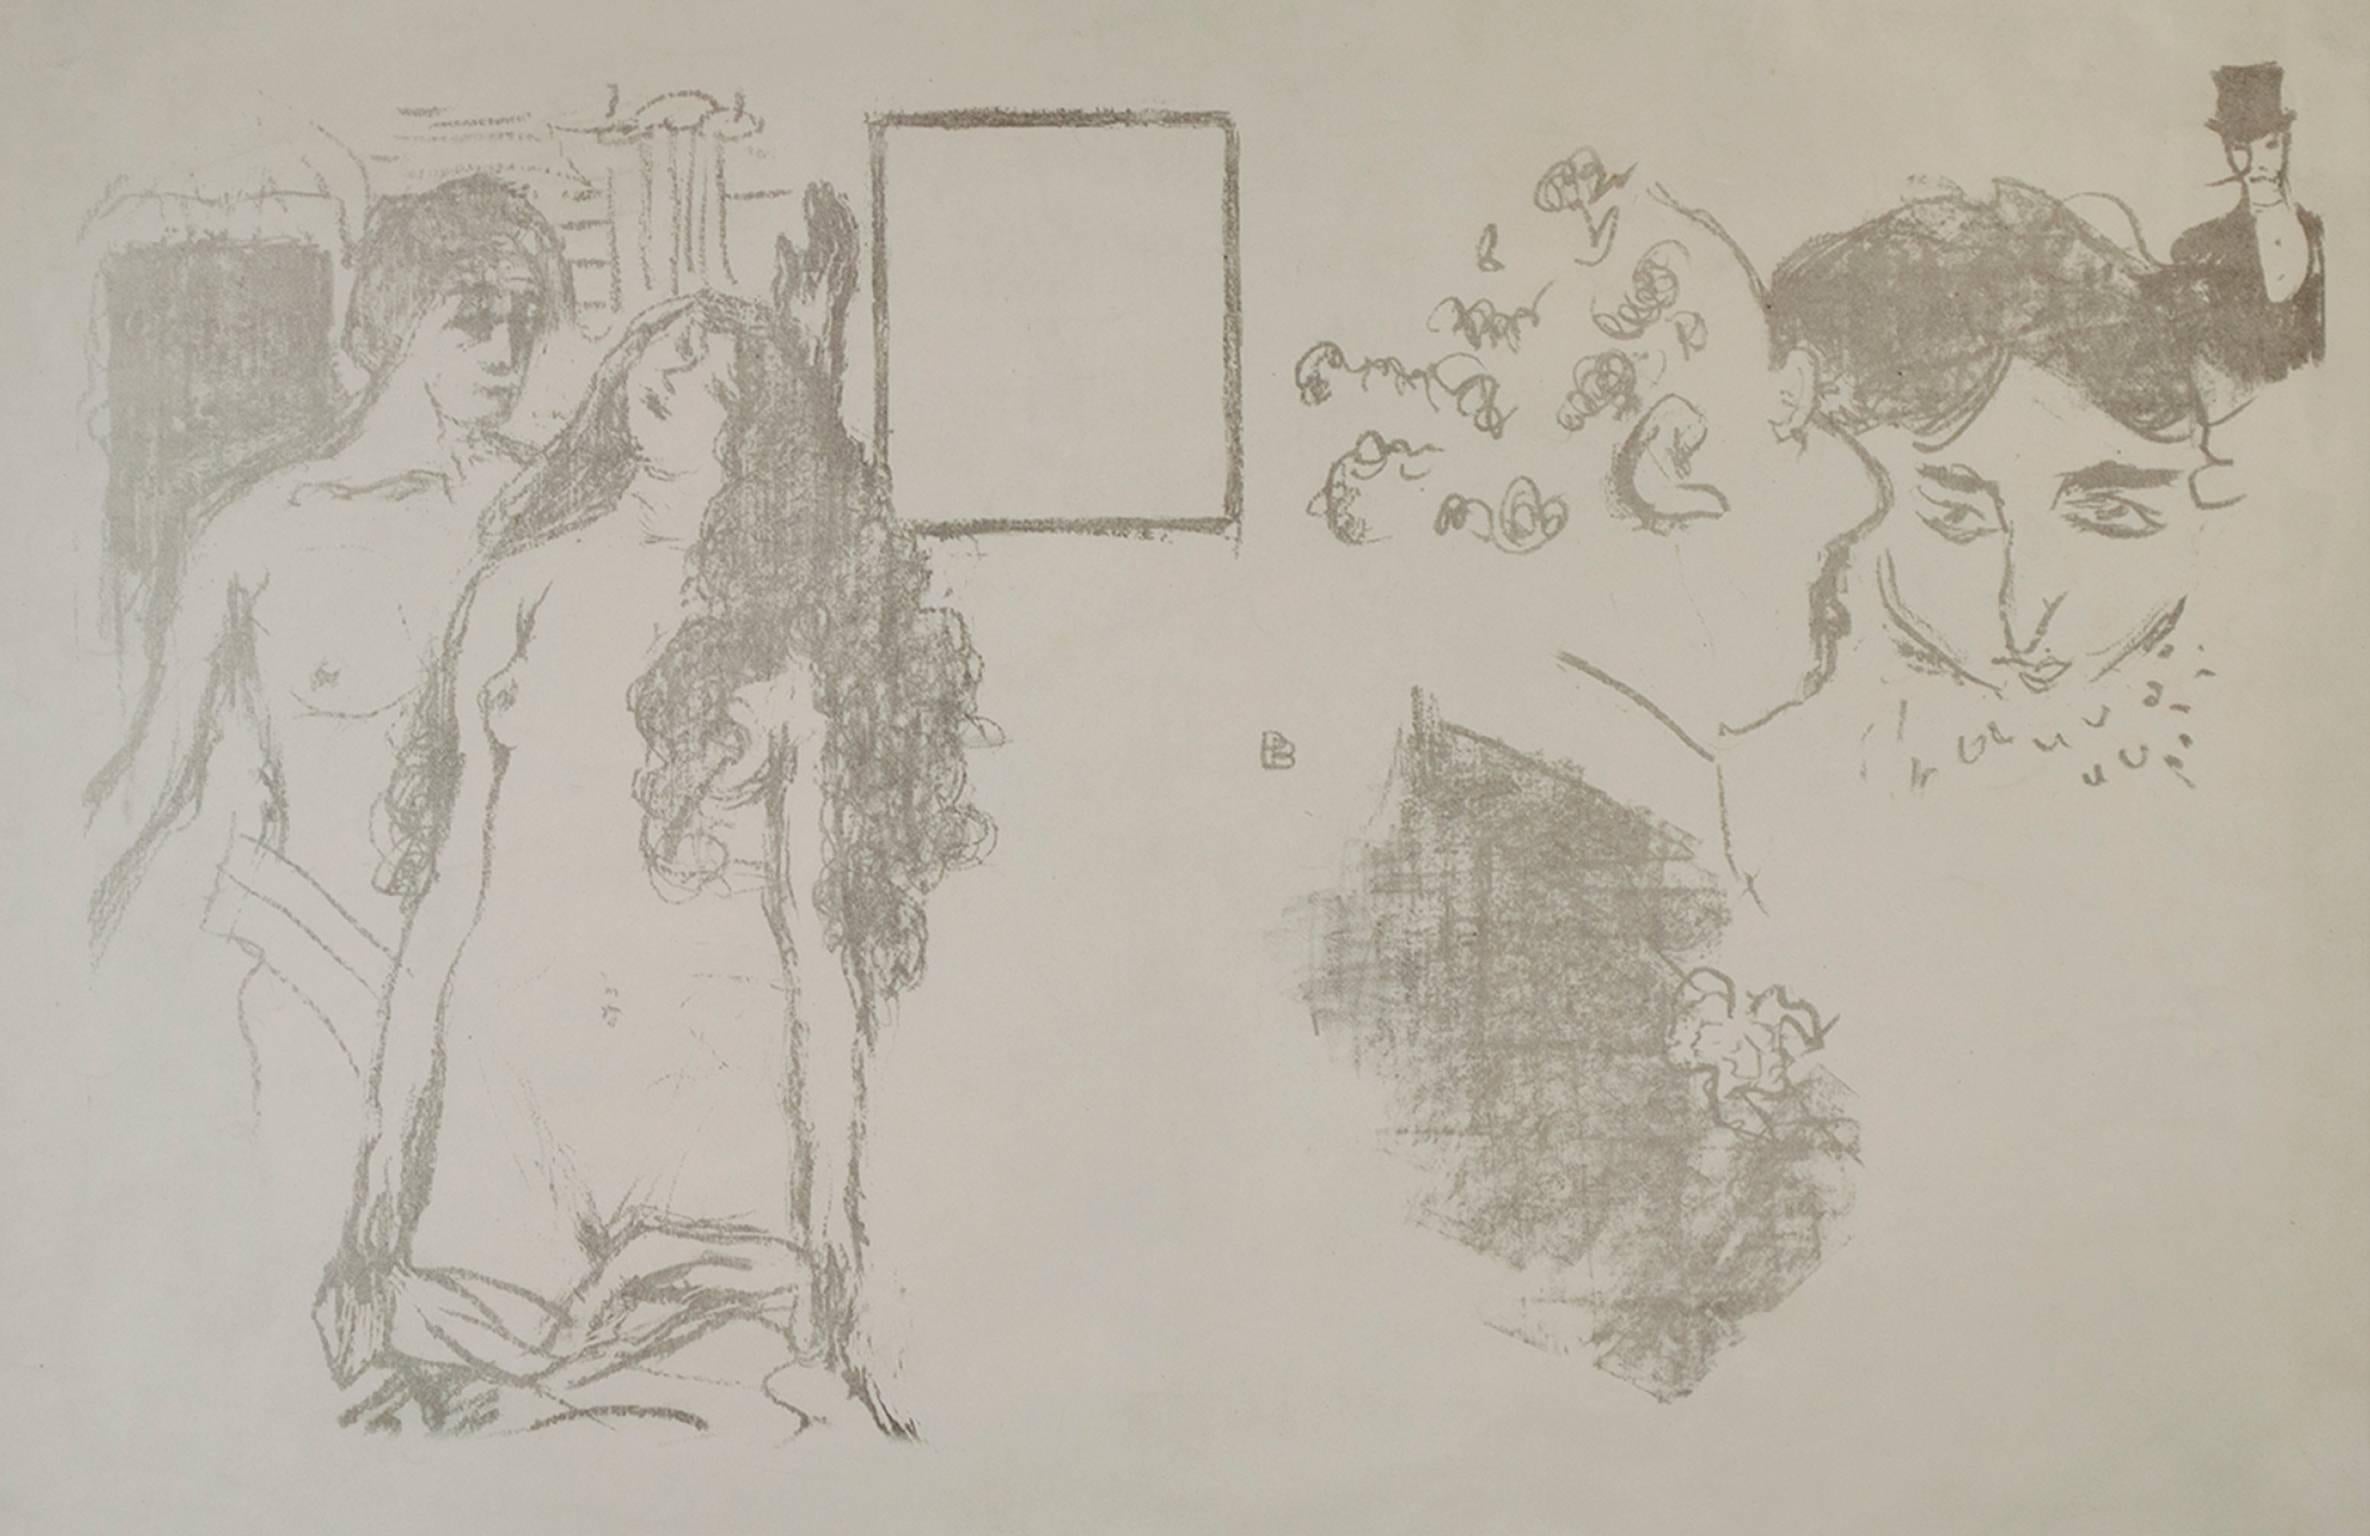 "La Derniere Croisade (CRM39)" is an original lithograph by Pierre Bonnard. This is a rare 1st state of this piece. The artist wrote his monogram in the center of the print. This piece depicts two near-nude figures on the left and three party-goers